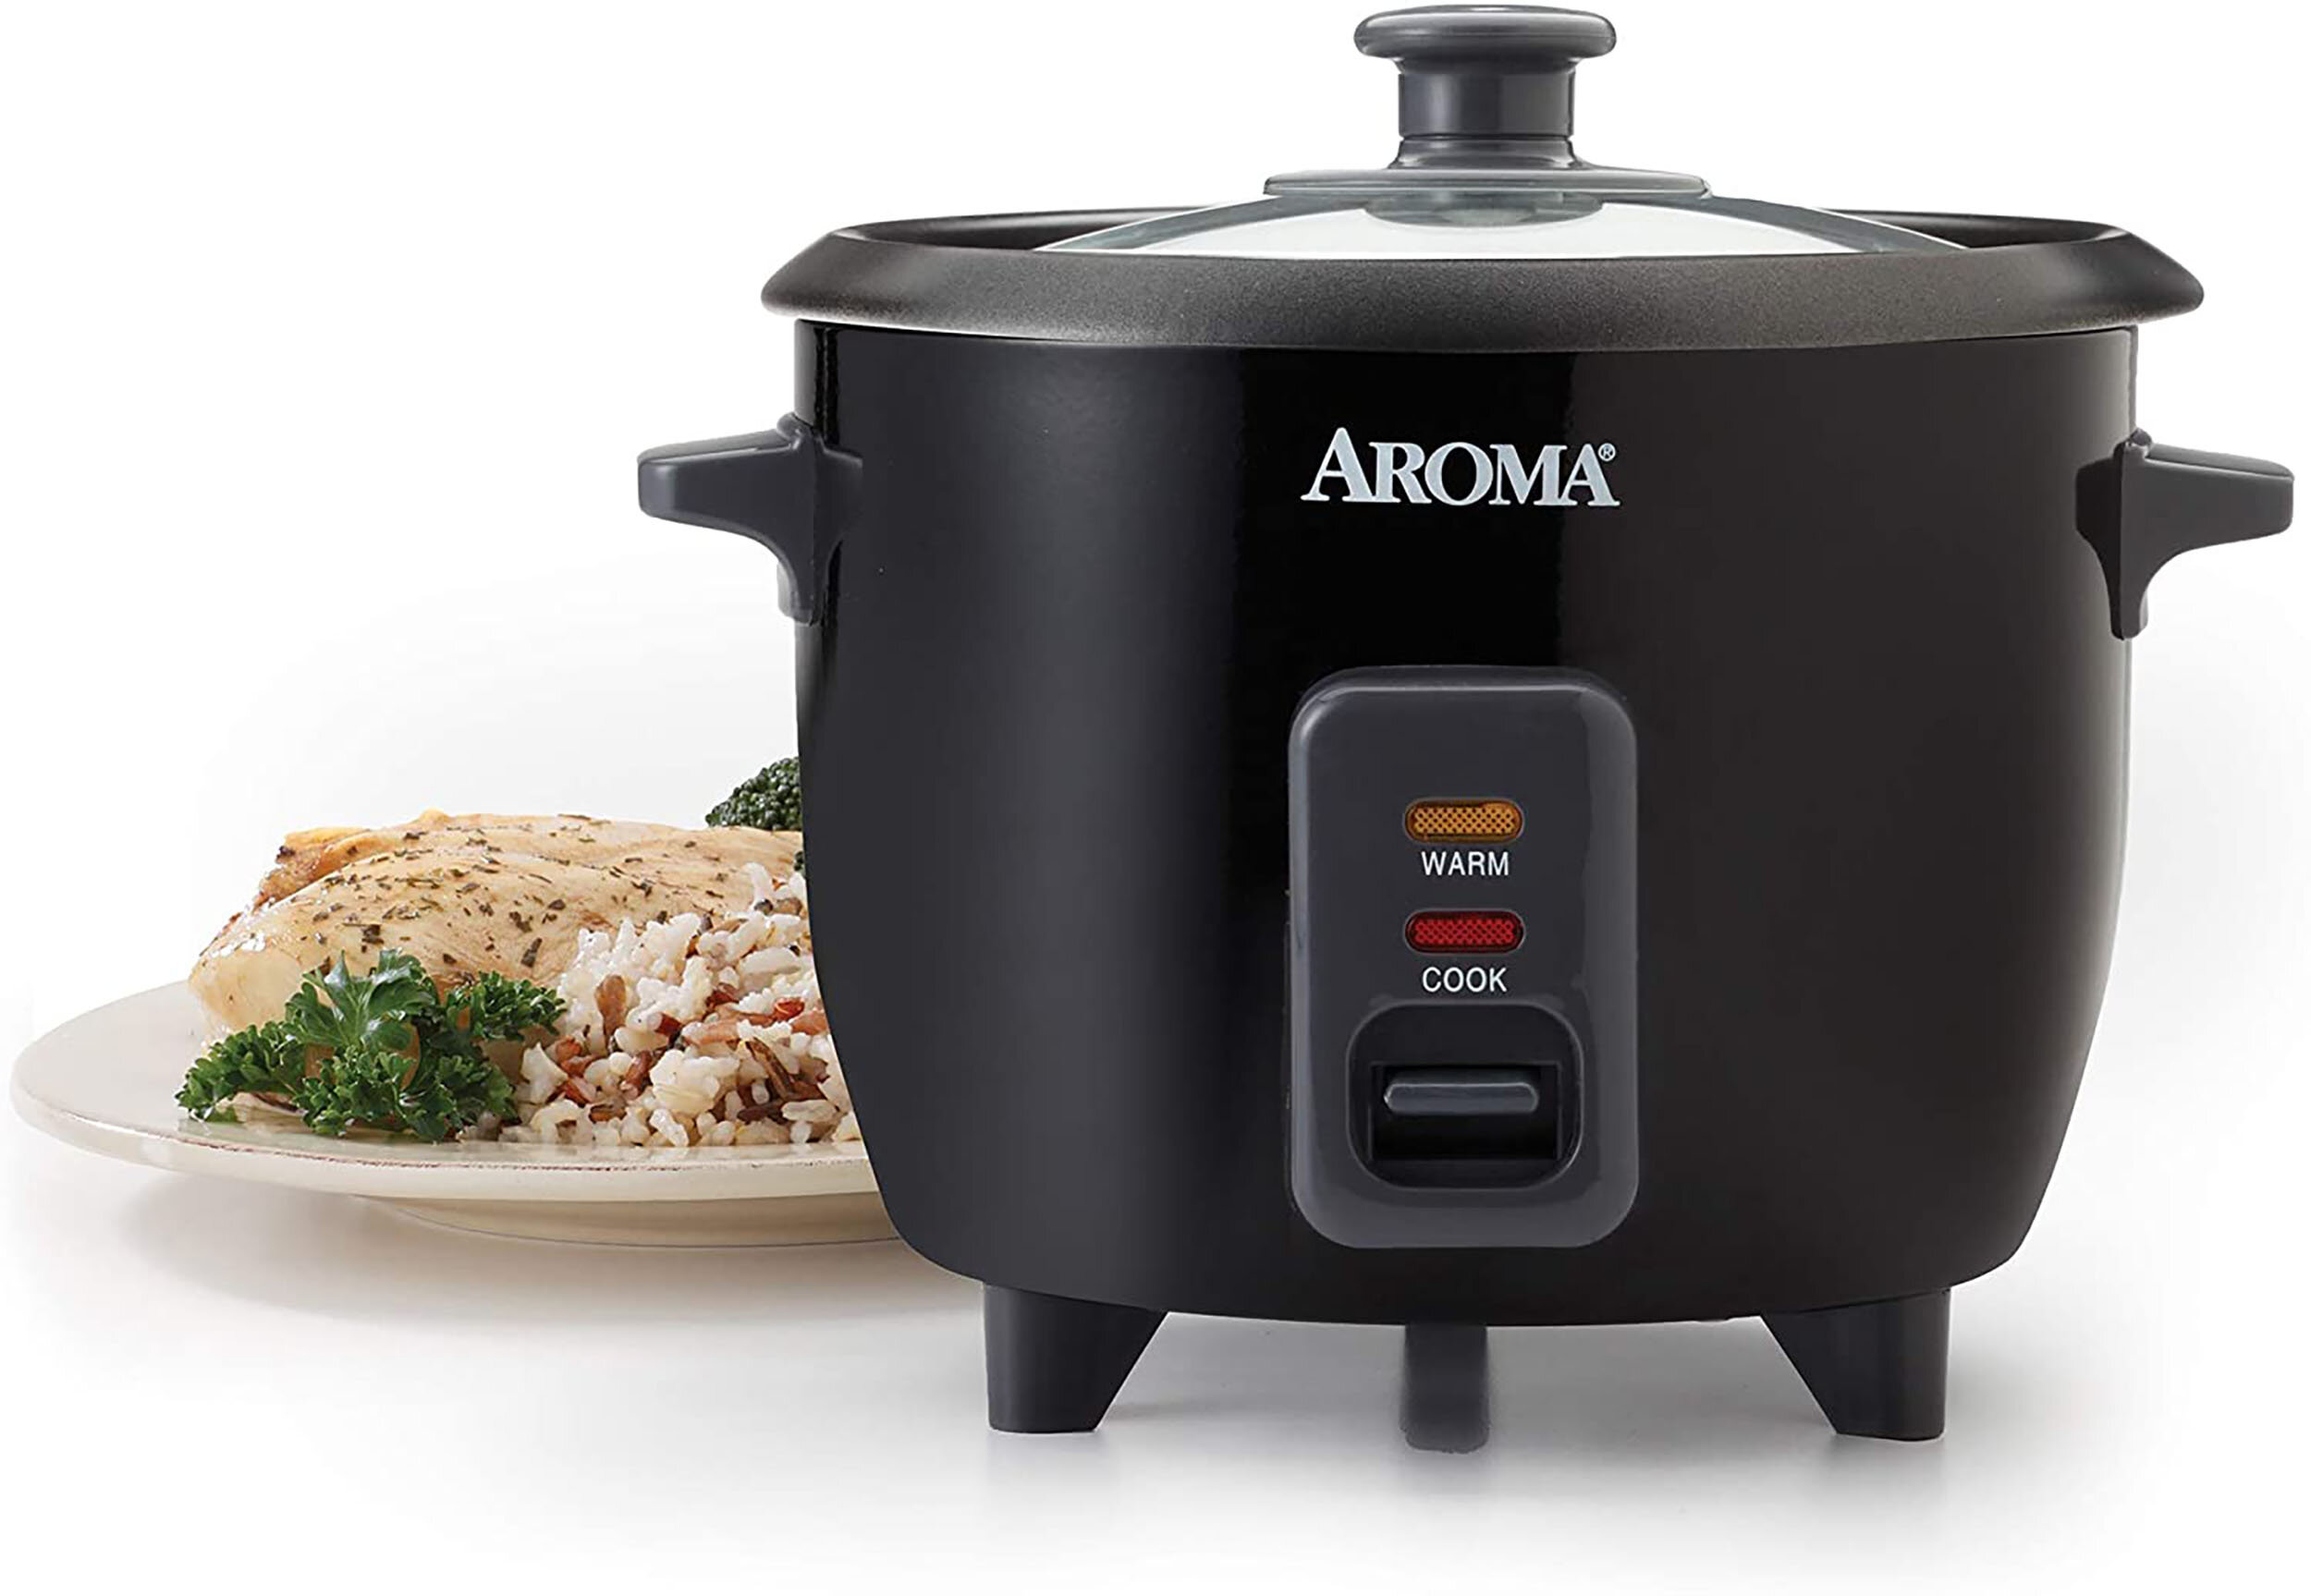 Aroma 6-Cup Rice Cooker with Stainless Steel Inner Pot